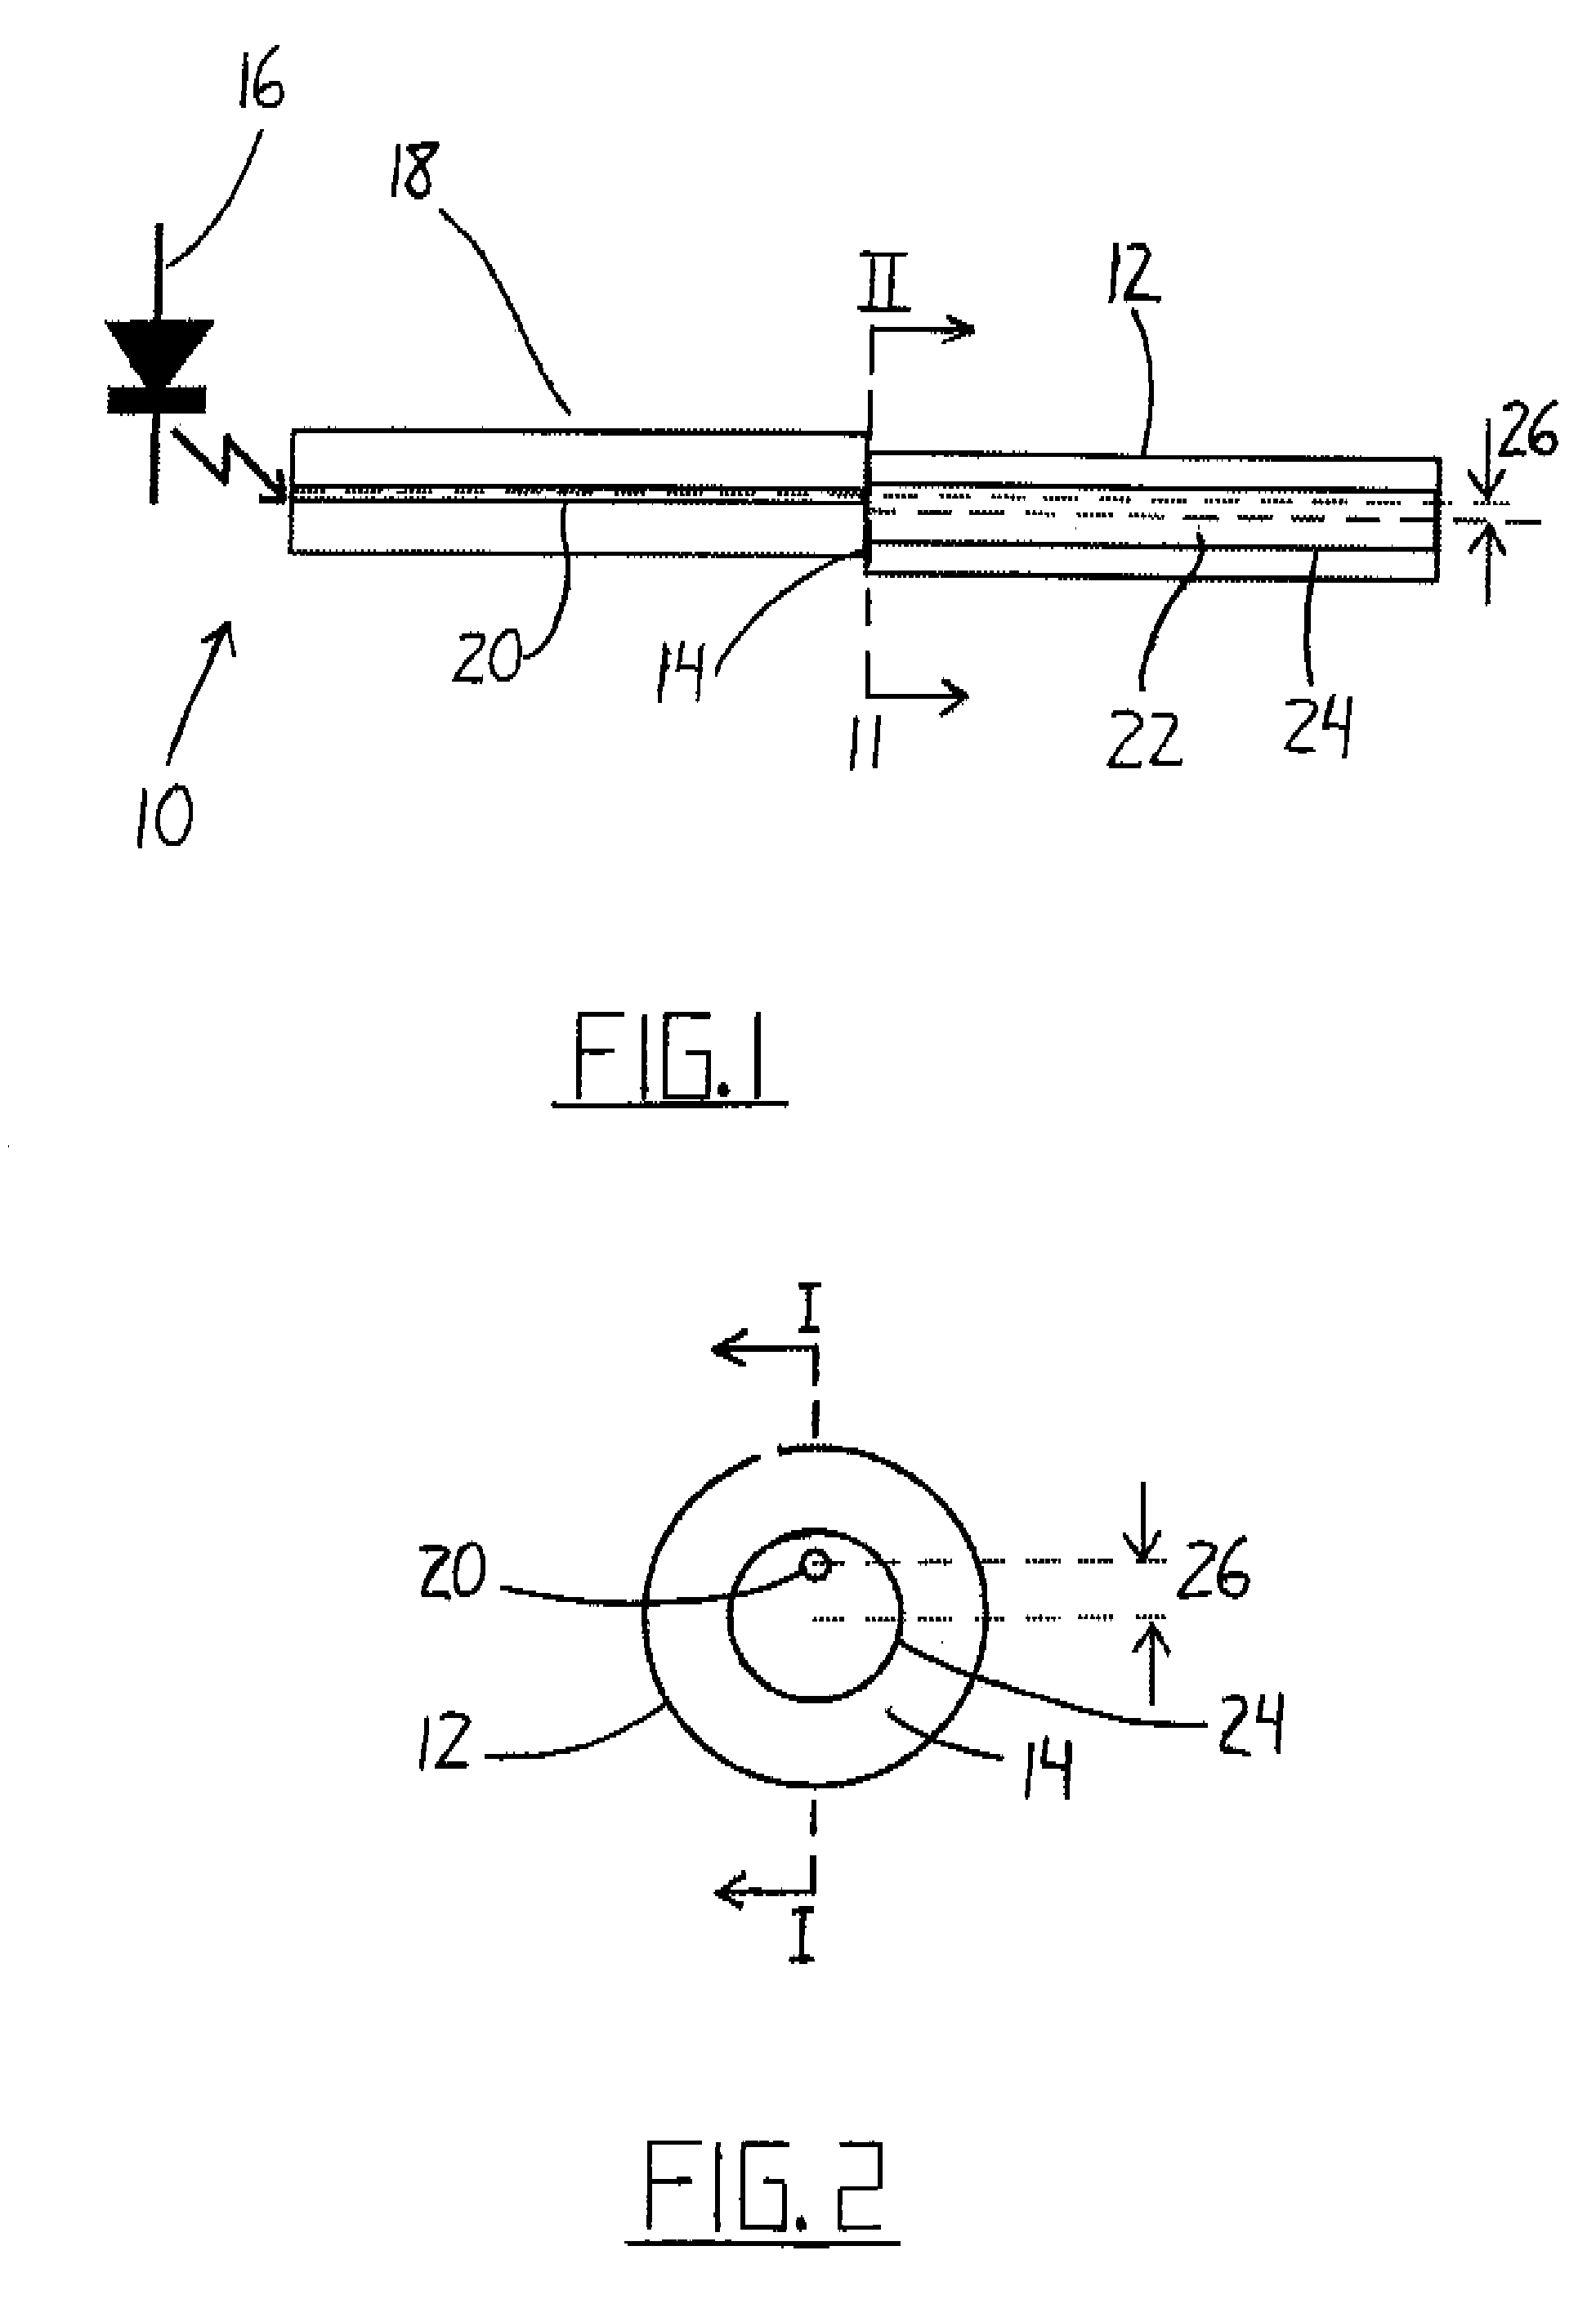 Method of high order mode excitation for multimode intrusion detection